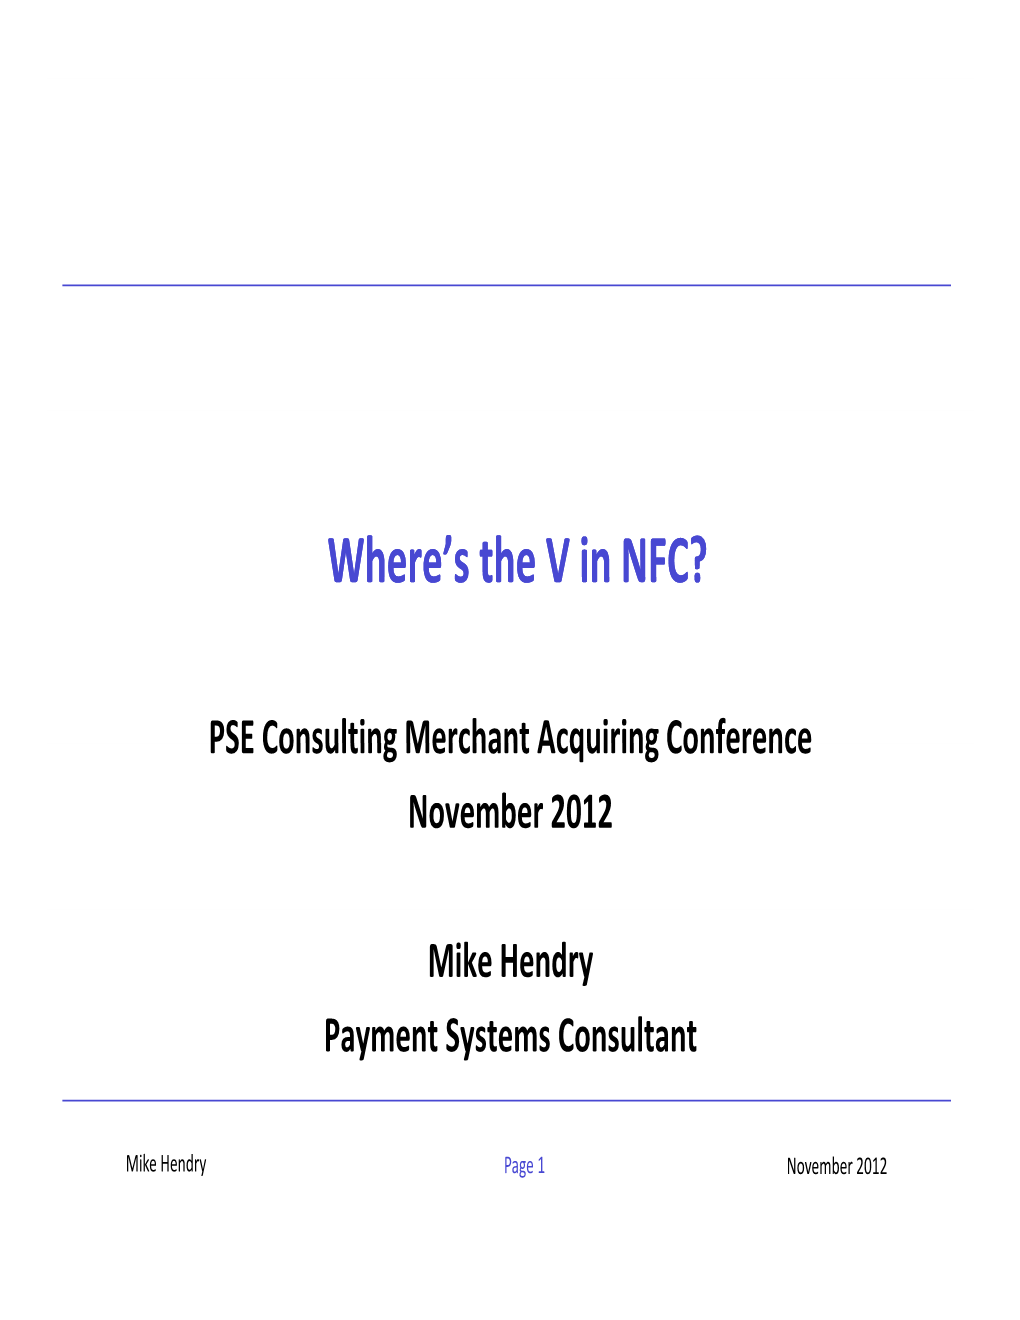 Where S the V in NFC?